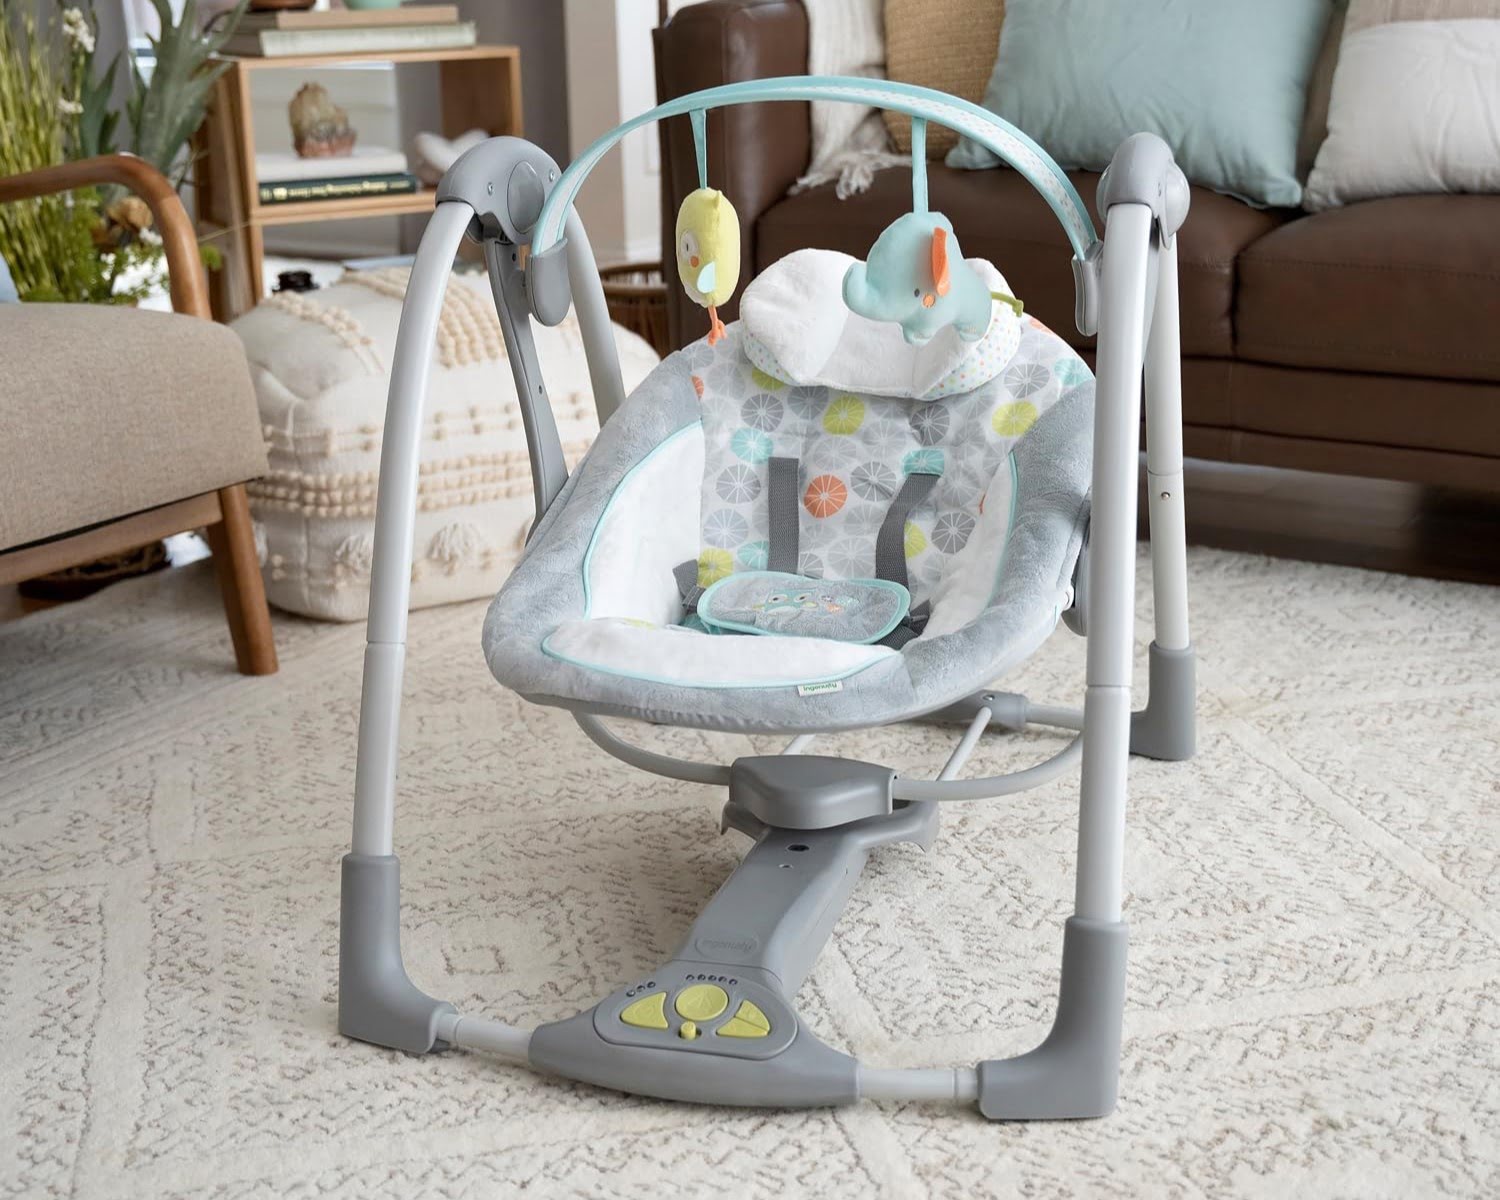 Foldable Baby Swing Review: Compact and Convenient